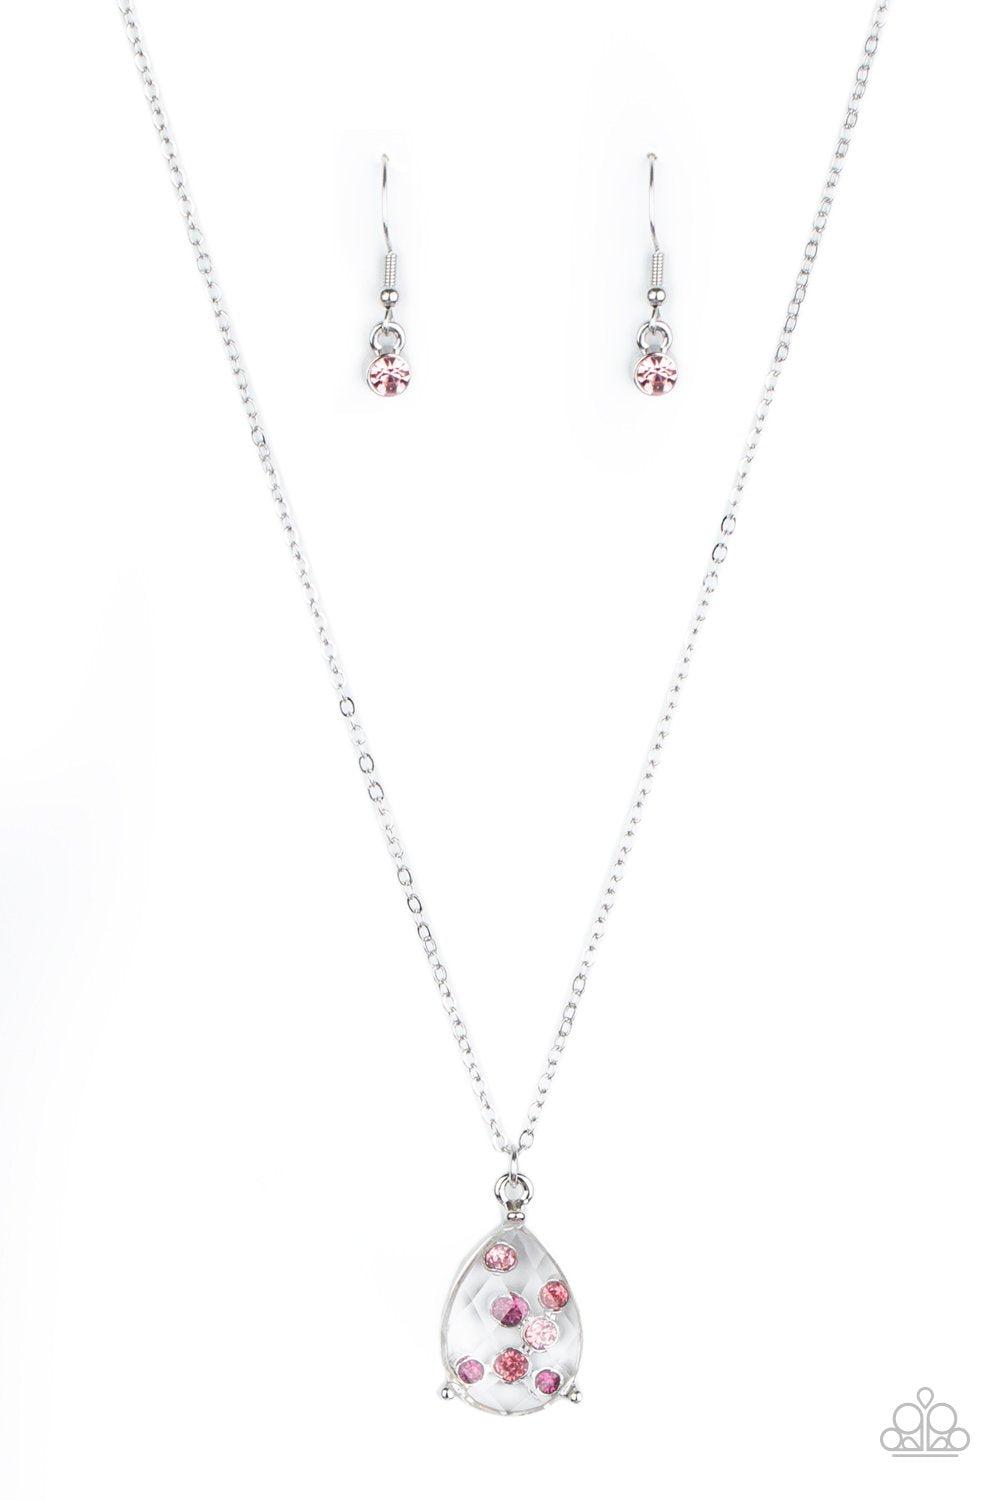 Stormy Shimmer Pink Rhinestone Teardrop Necklace - Paparazzi Accessories- lightbox - CarasShop.com - $5 Jewelry by Cara Jewels